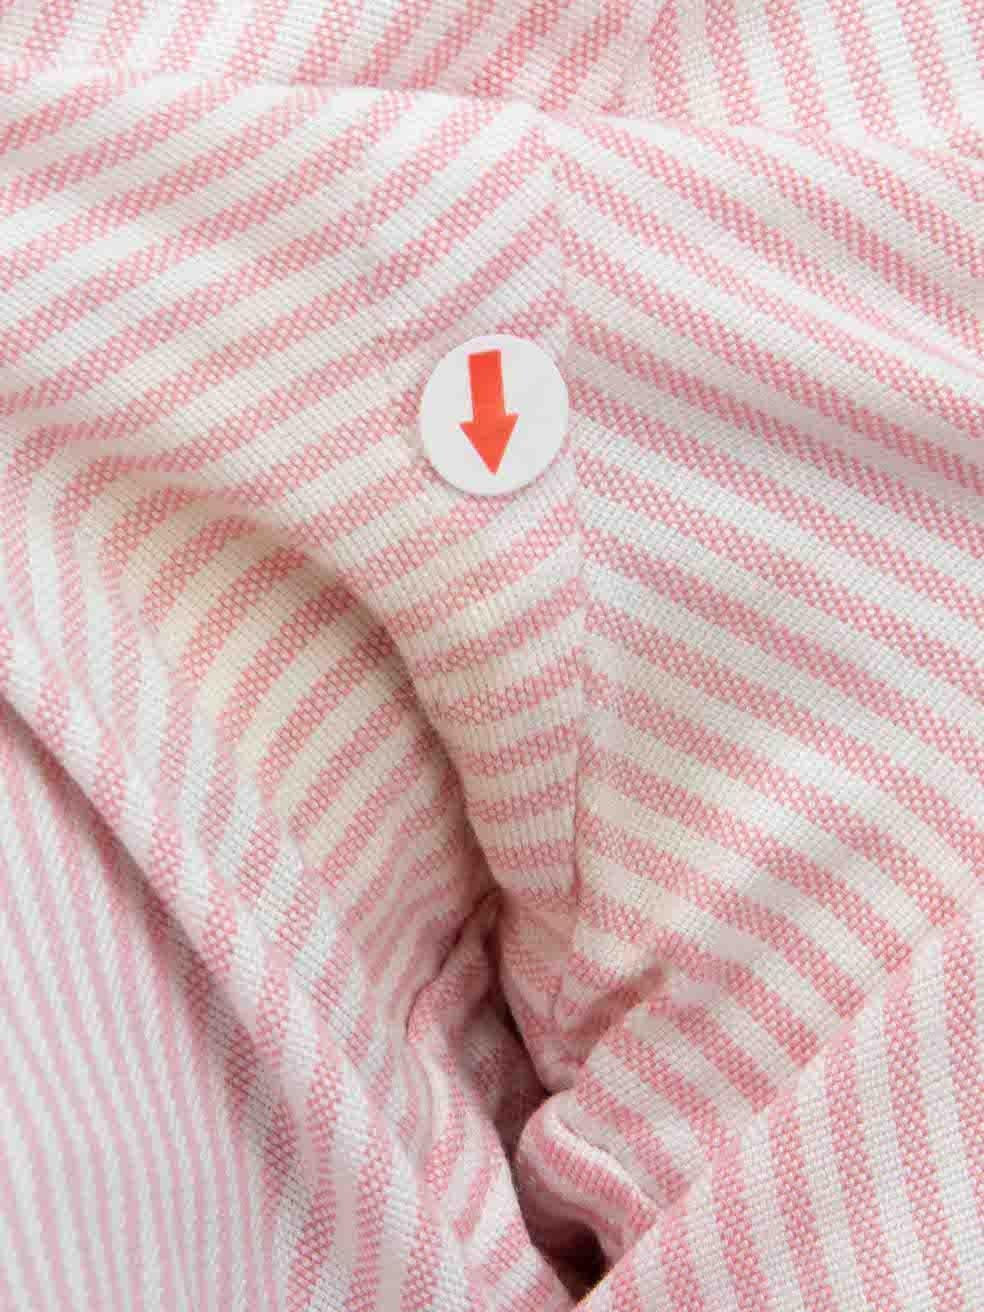 Ralph Lauren Pink Striped Long Sleeves Shirt Size M For Sale 1